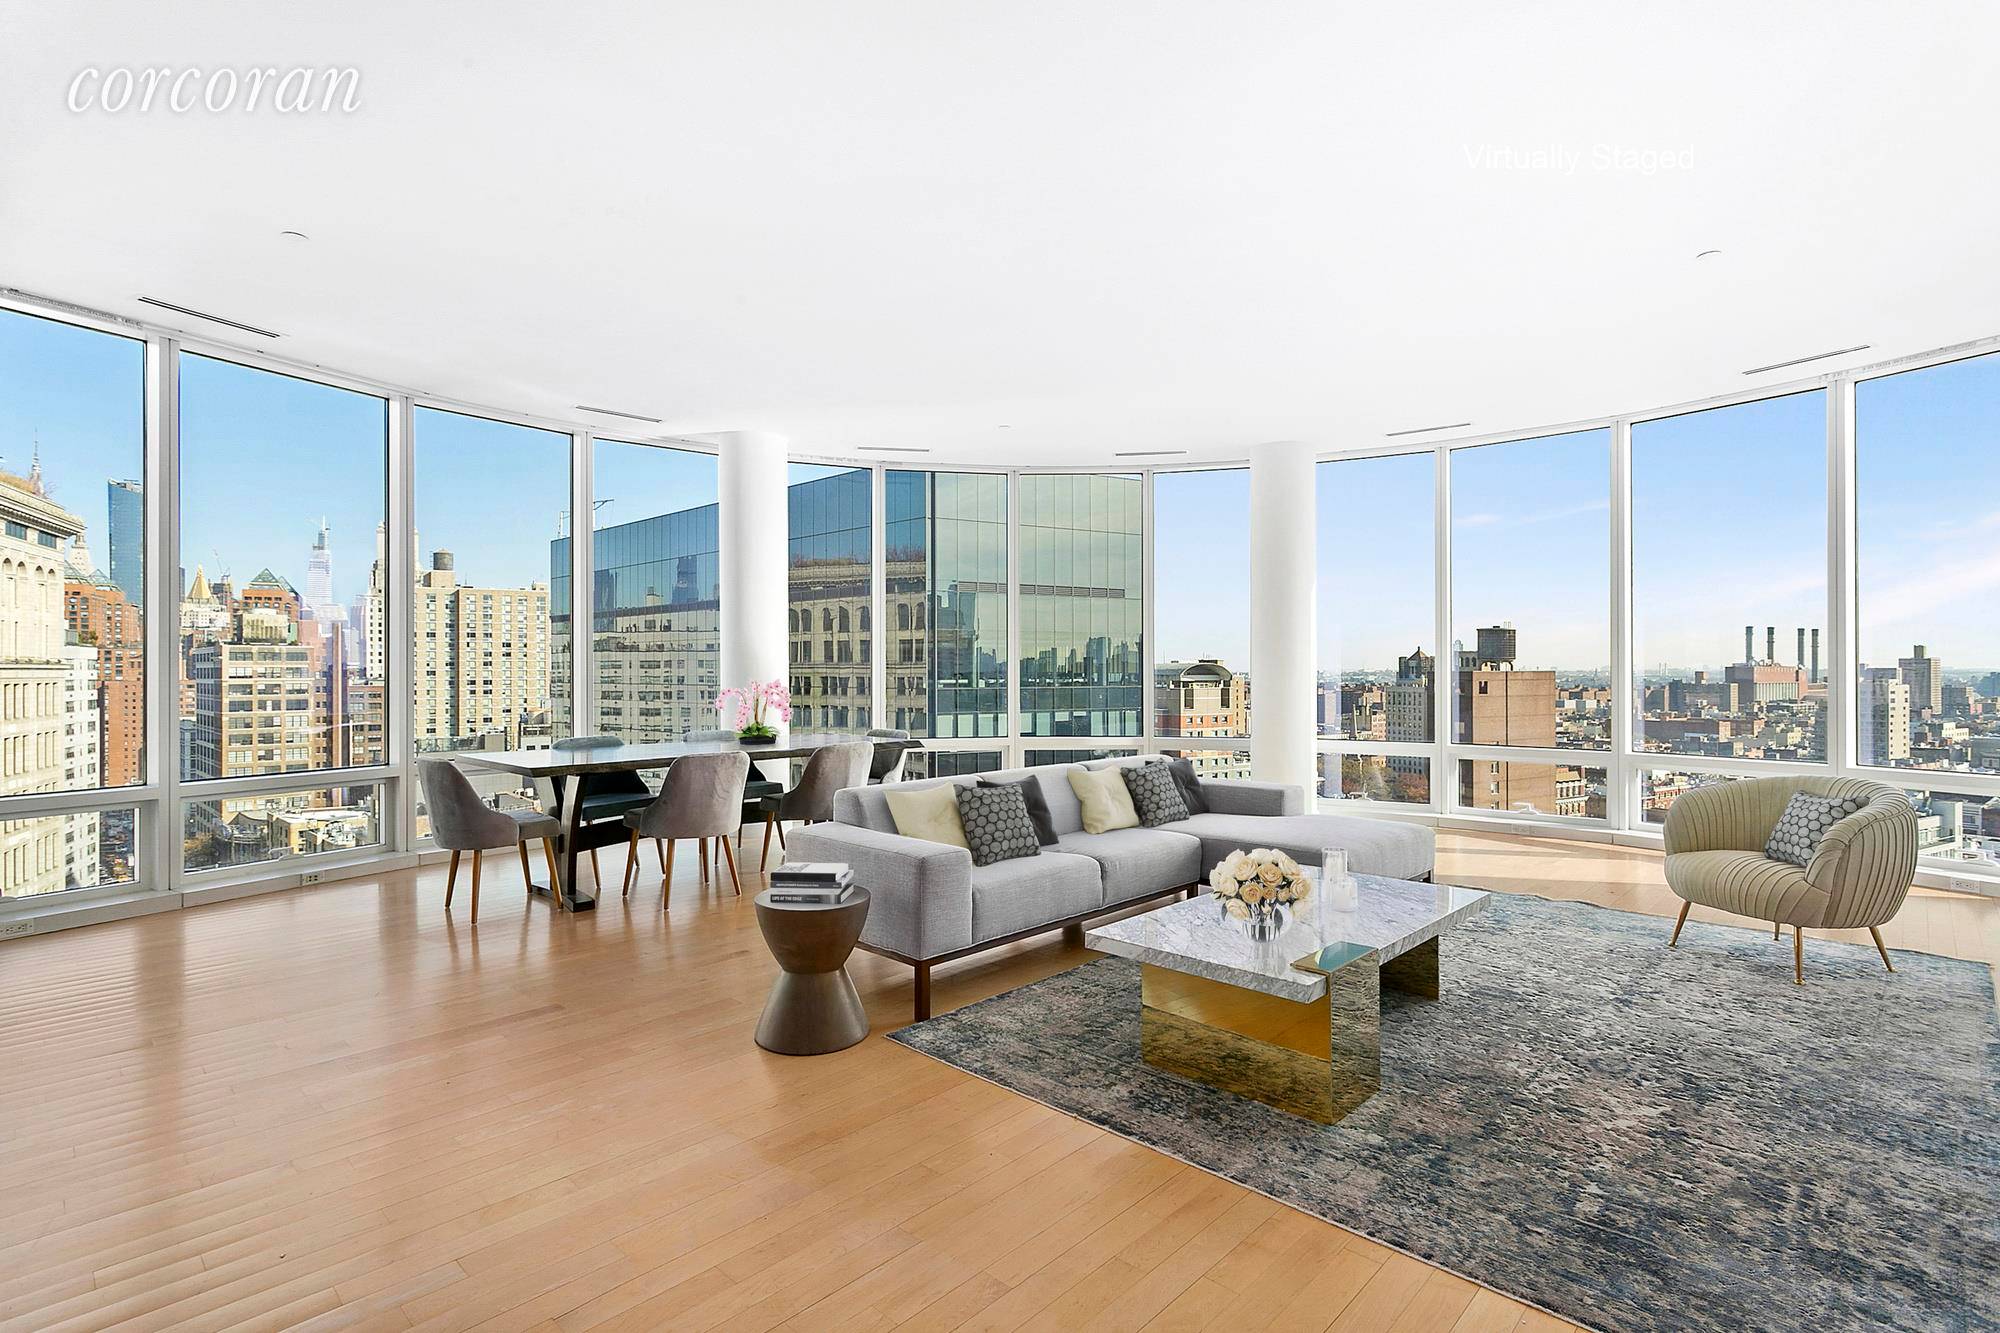 Walk in and be wowed by panoramic views from this high floor three bedroom, three bath residence.